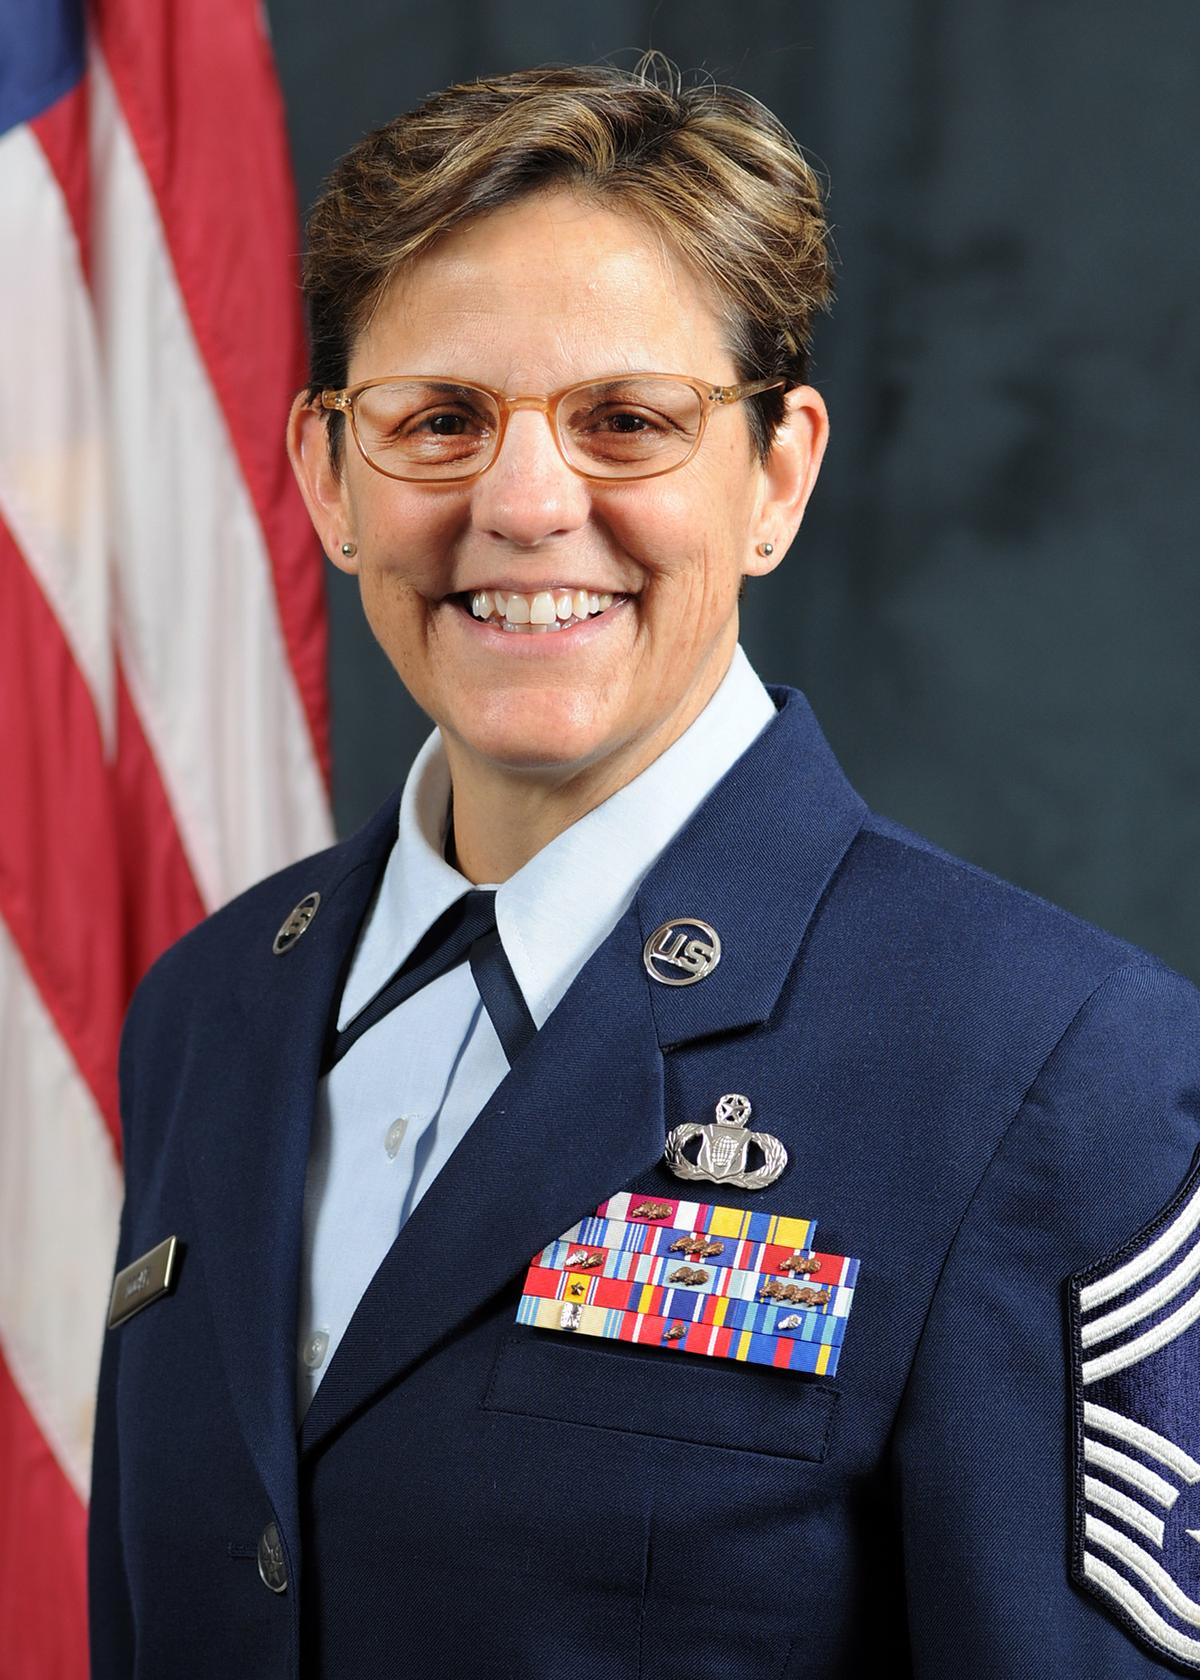 Command Chief Master Sgt. Maureen Dooley (<a href="https://www.dvidshub.net/image/4139957/new-enlisted-leader-new-york-air-national-guard">DVIDSHUB</a>)